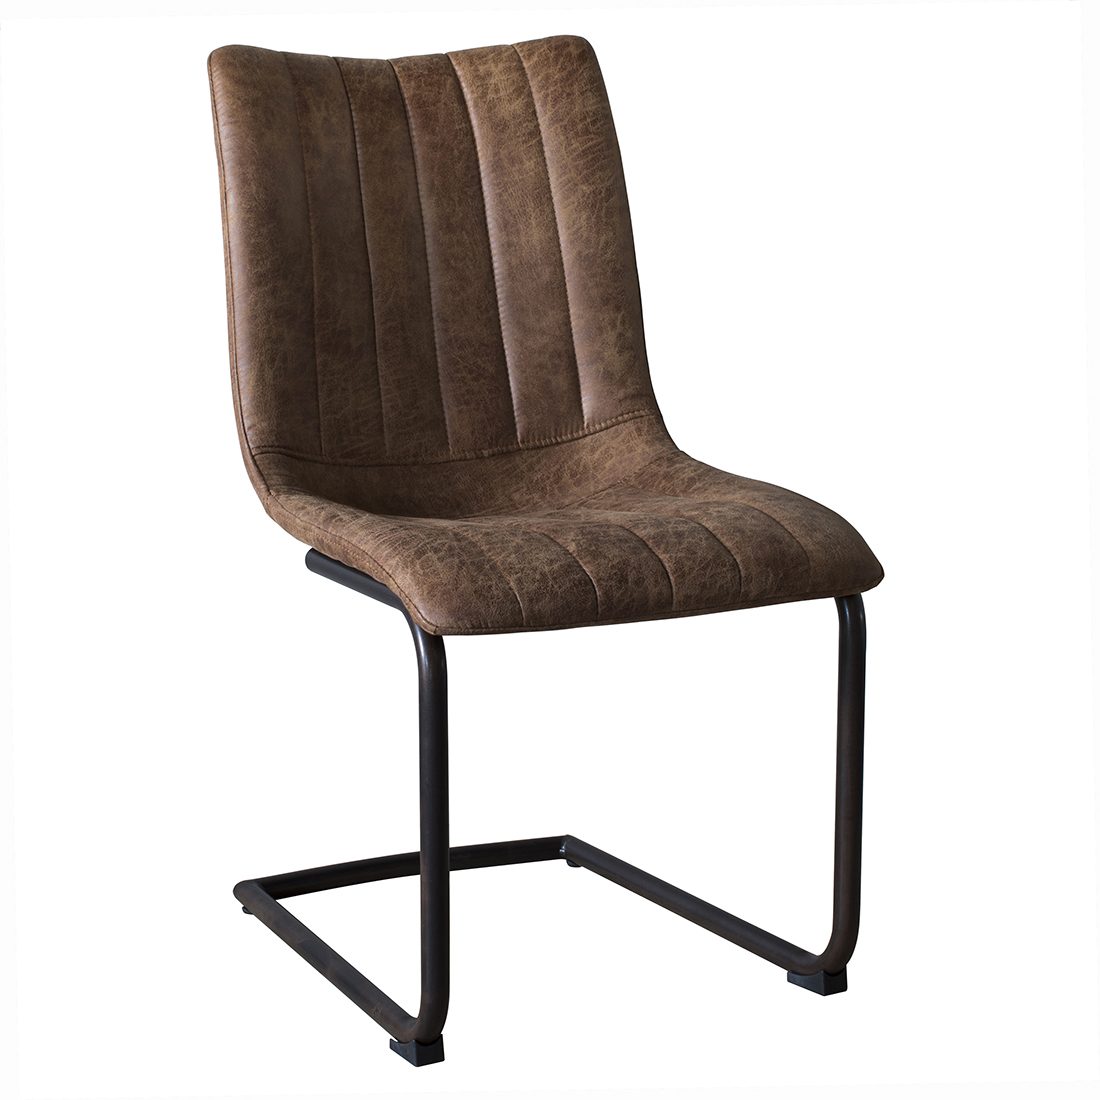 Brown Faux Leather Retro Dining Chairs, Brown Faux Leather Chairs